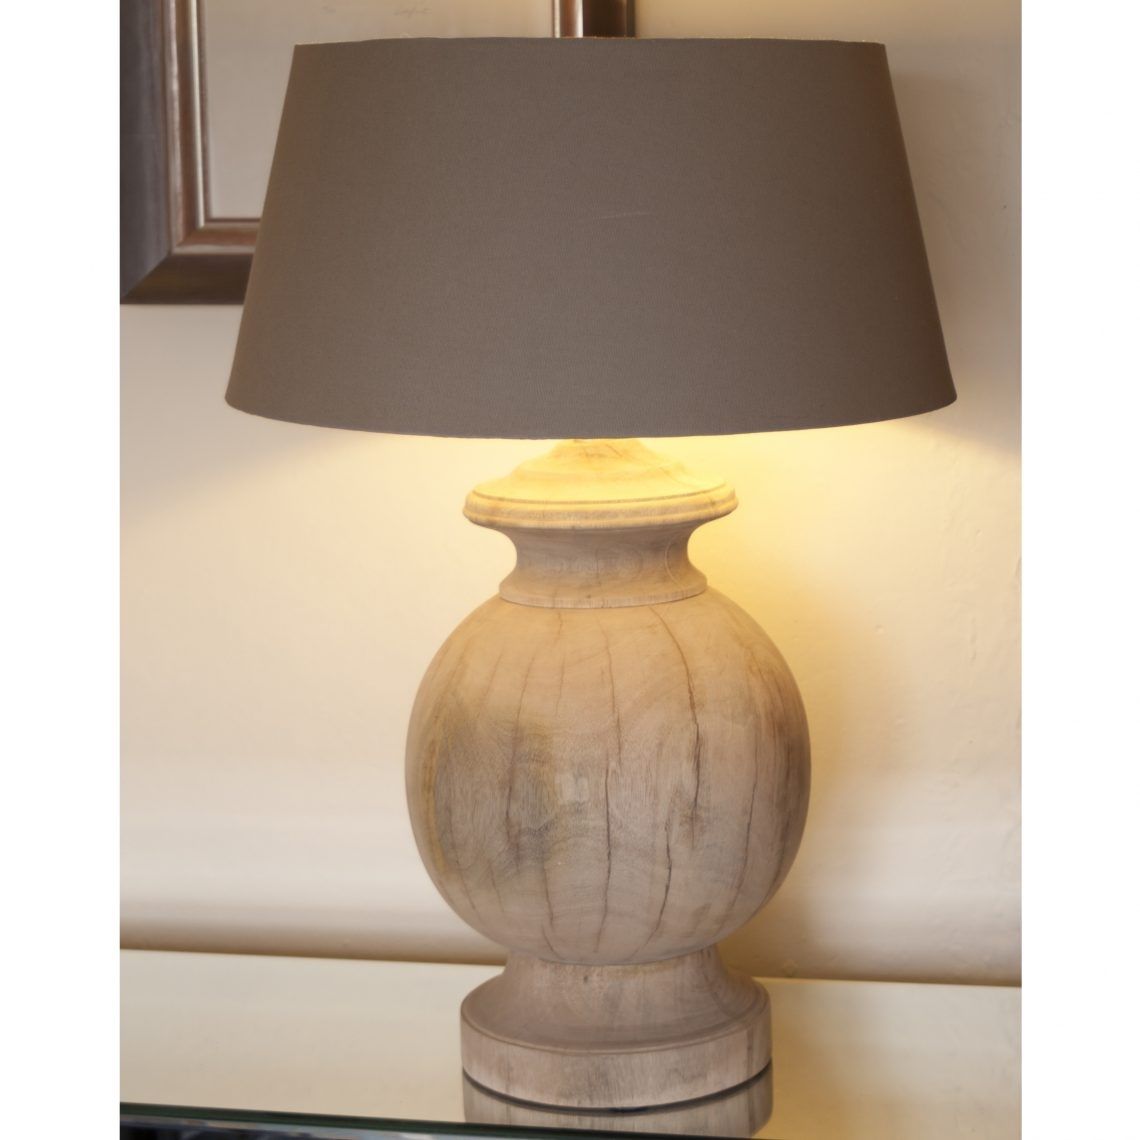 Buy Table Lamp Grey Bedside Lamps Bedroom Amazon For Cheap Living In Ceramic Living Room Table Lamps (Photo 6 of 15)